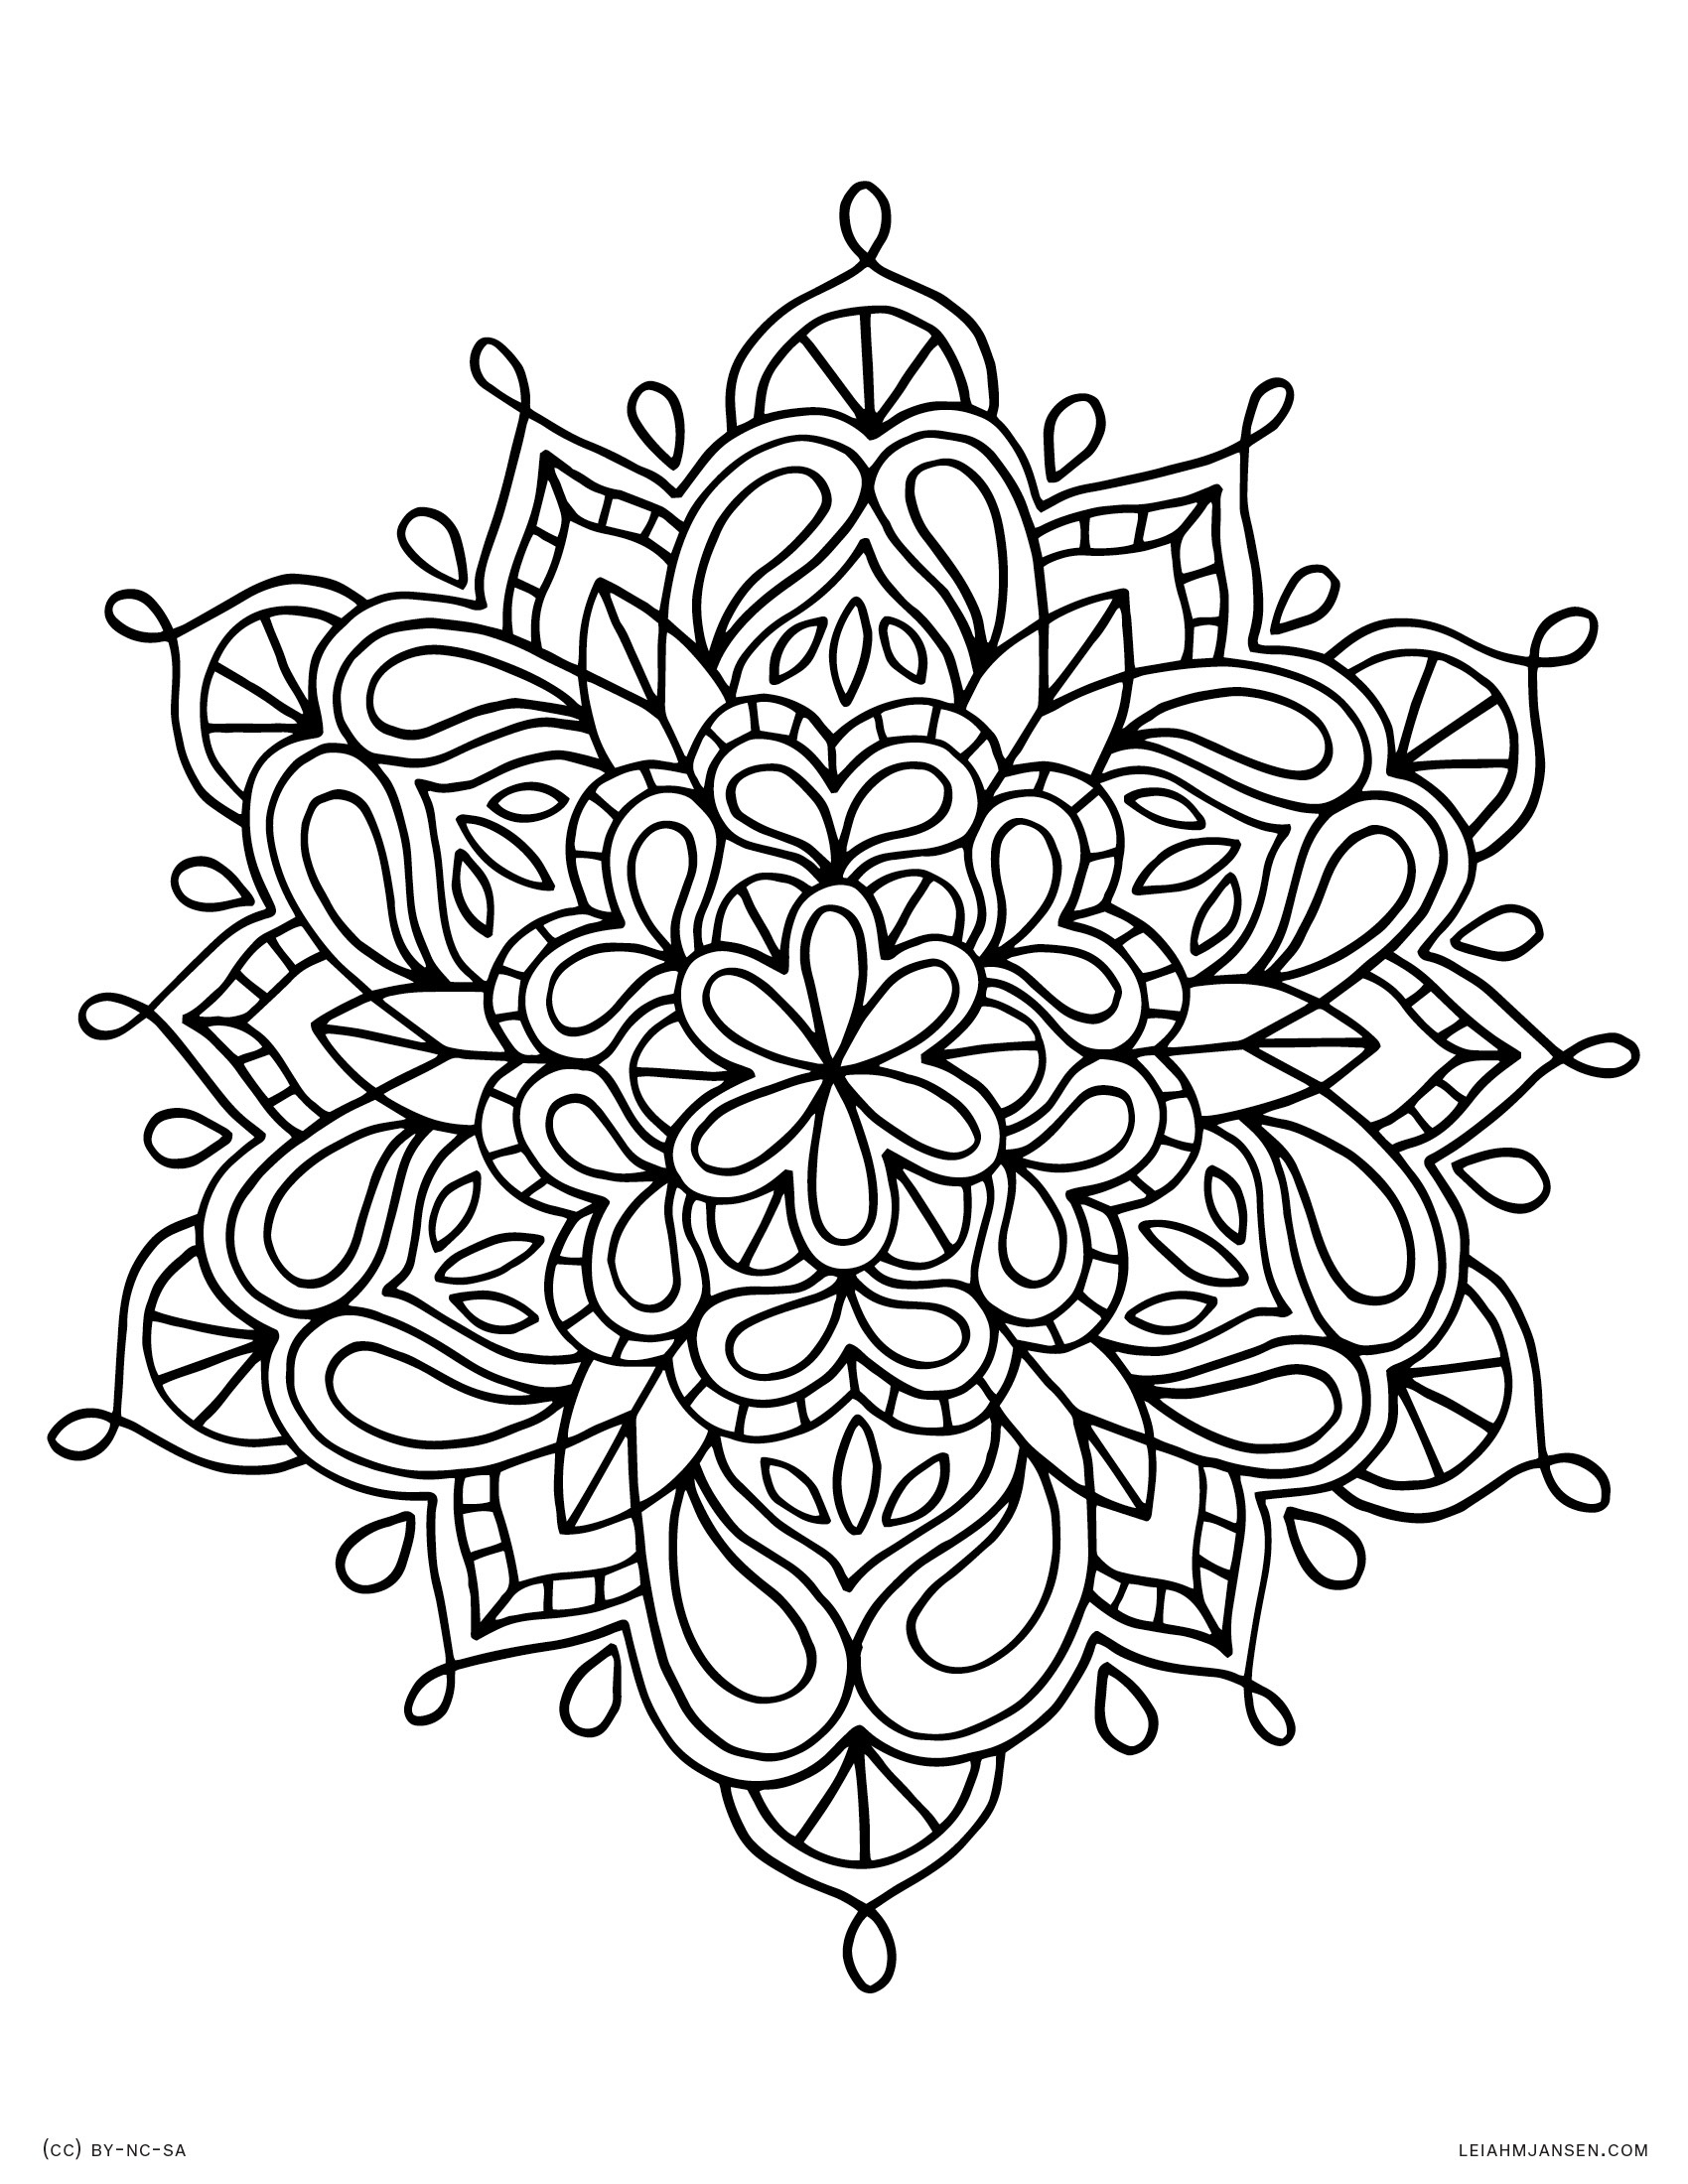 Coloring Pages - Free Printable Coloring Books